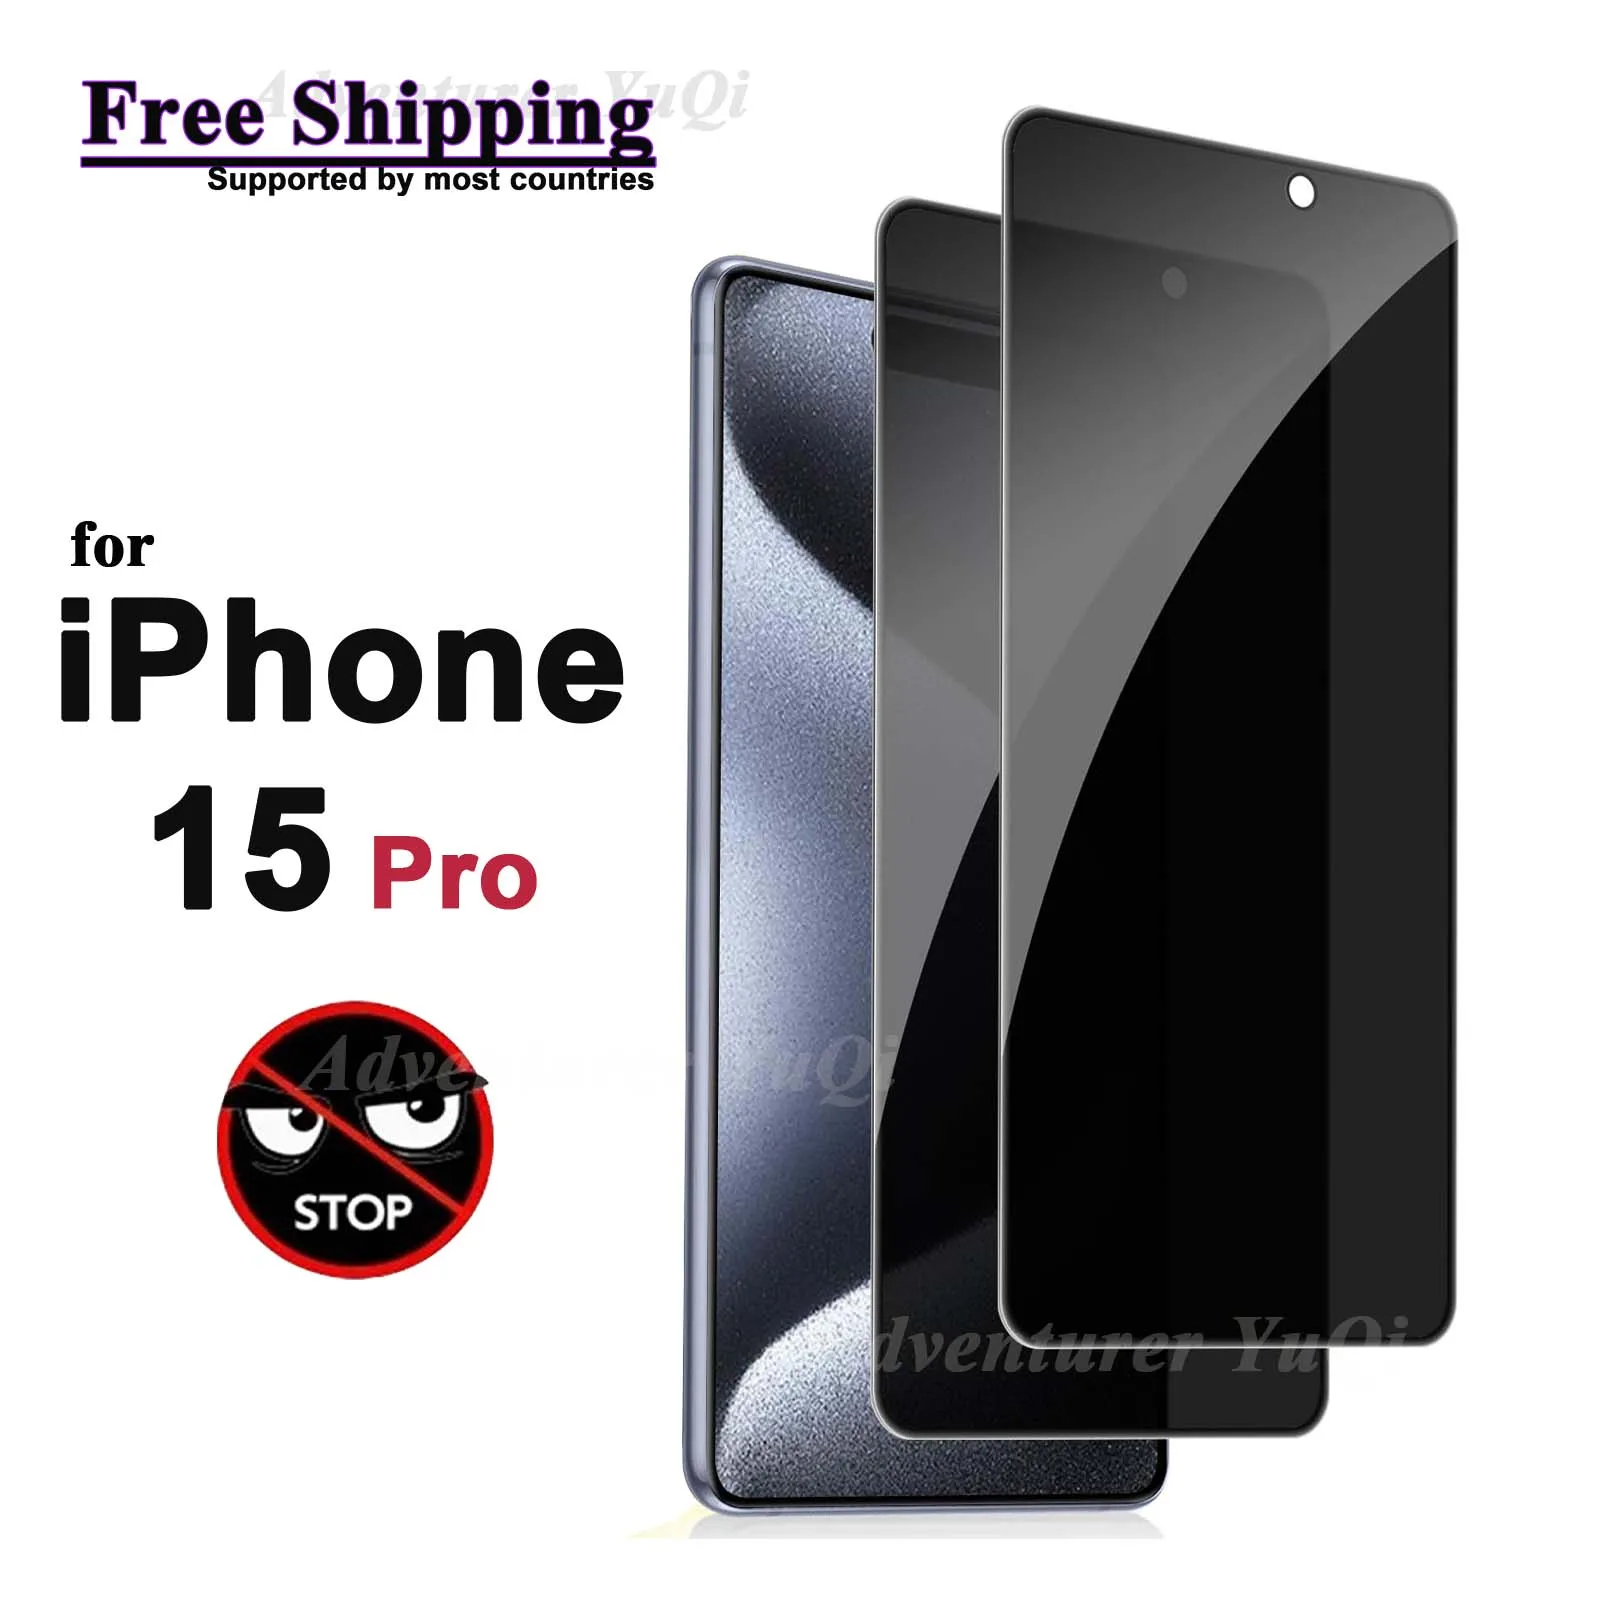 

Anti Spy Screen Protector For iPhone 15 Pro, Tempered Glass Privacy Anti Peep Scratch 9H Case Friendly Free Shippin